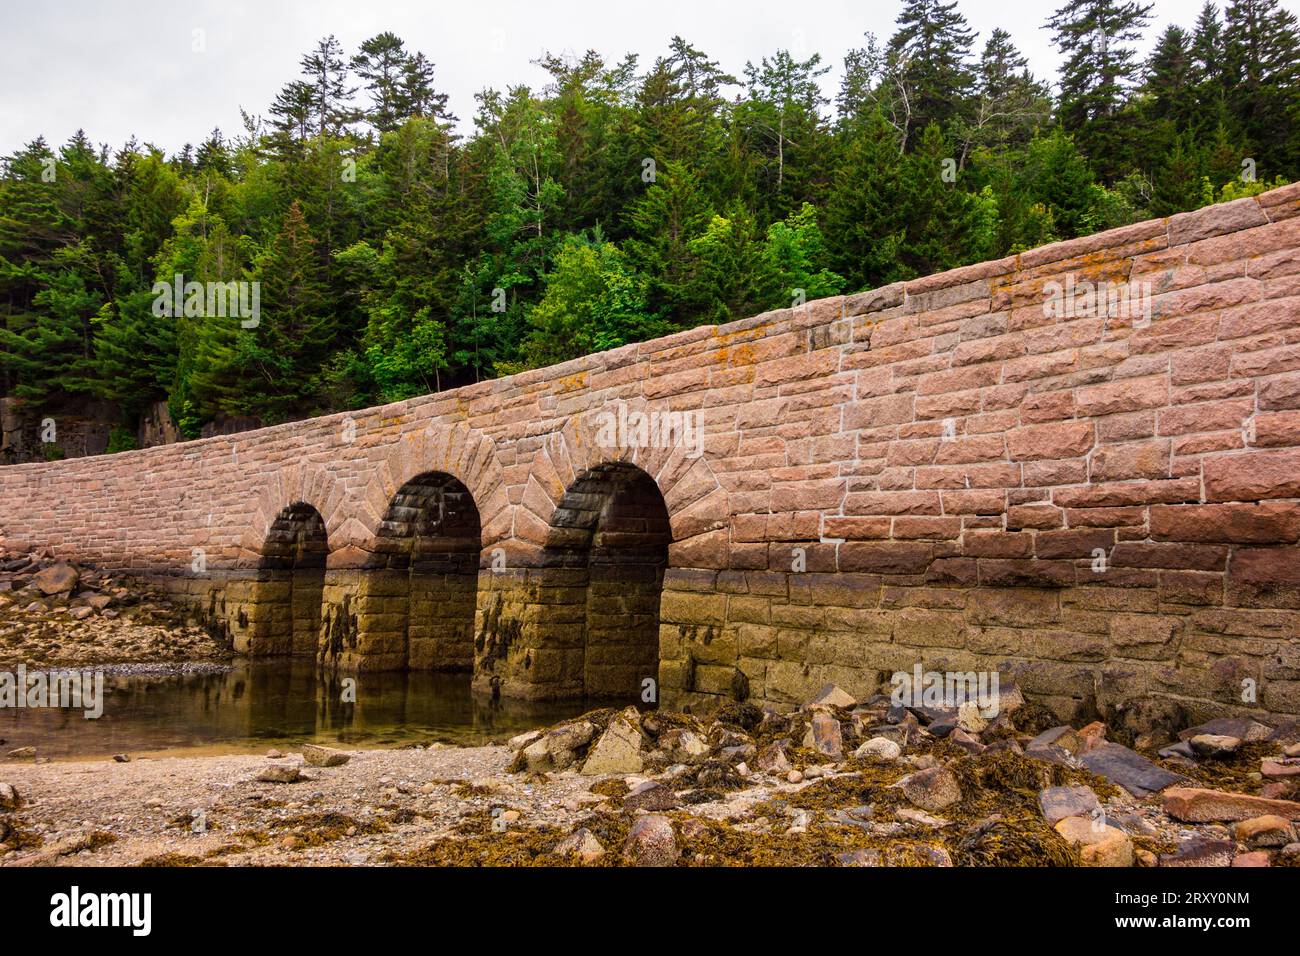 Arched bridge in Acadia national Park. Picture taken in the summer on a cloudy day while the tide was low. Stock Photo